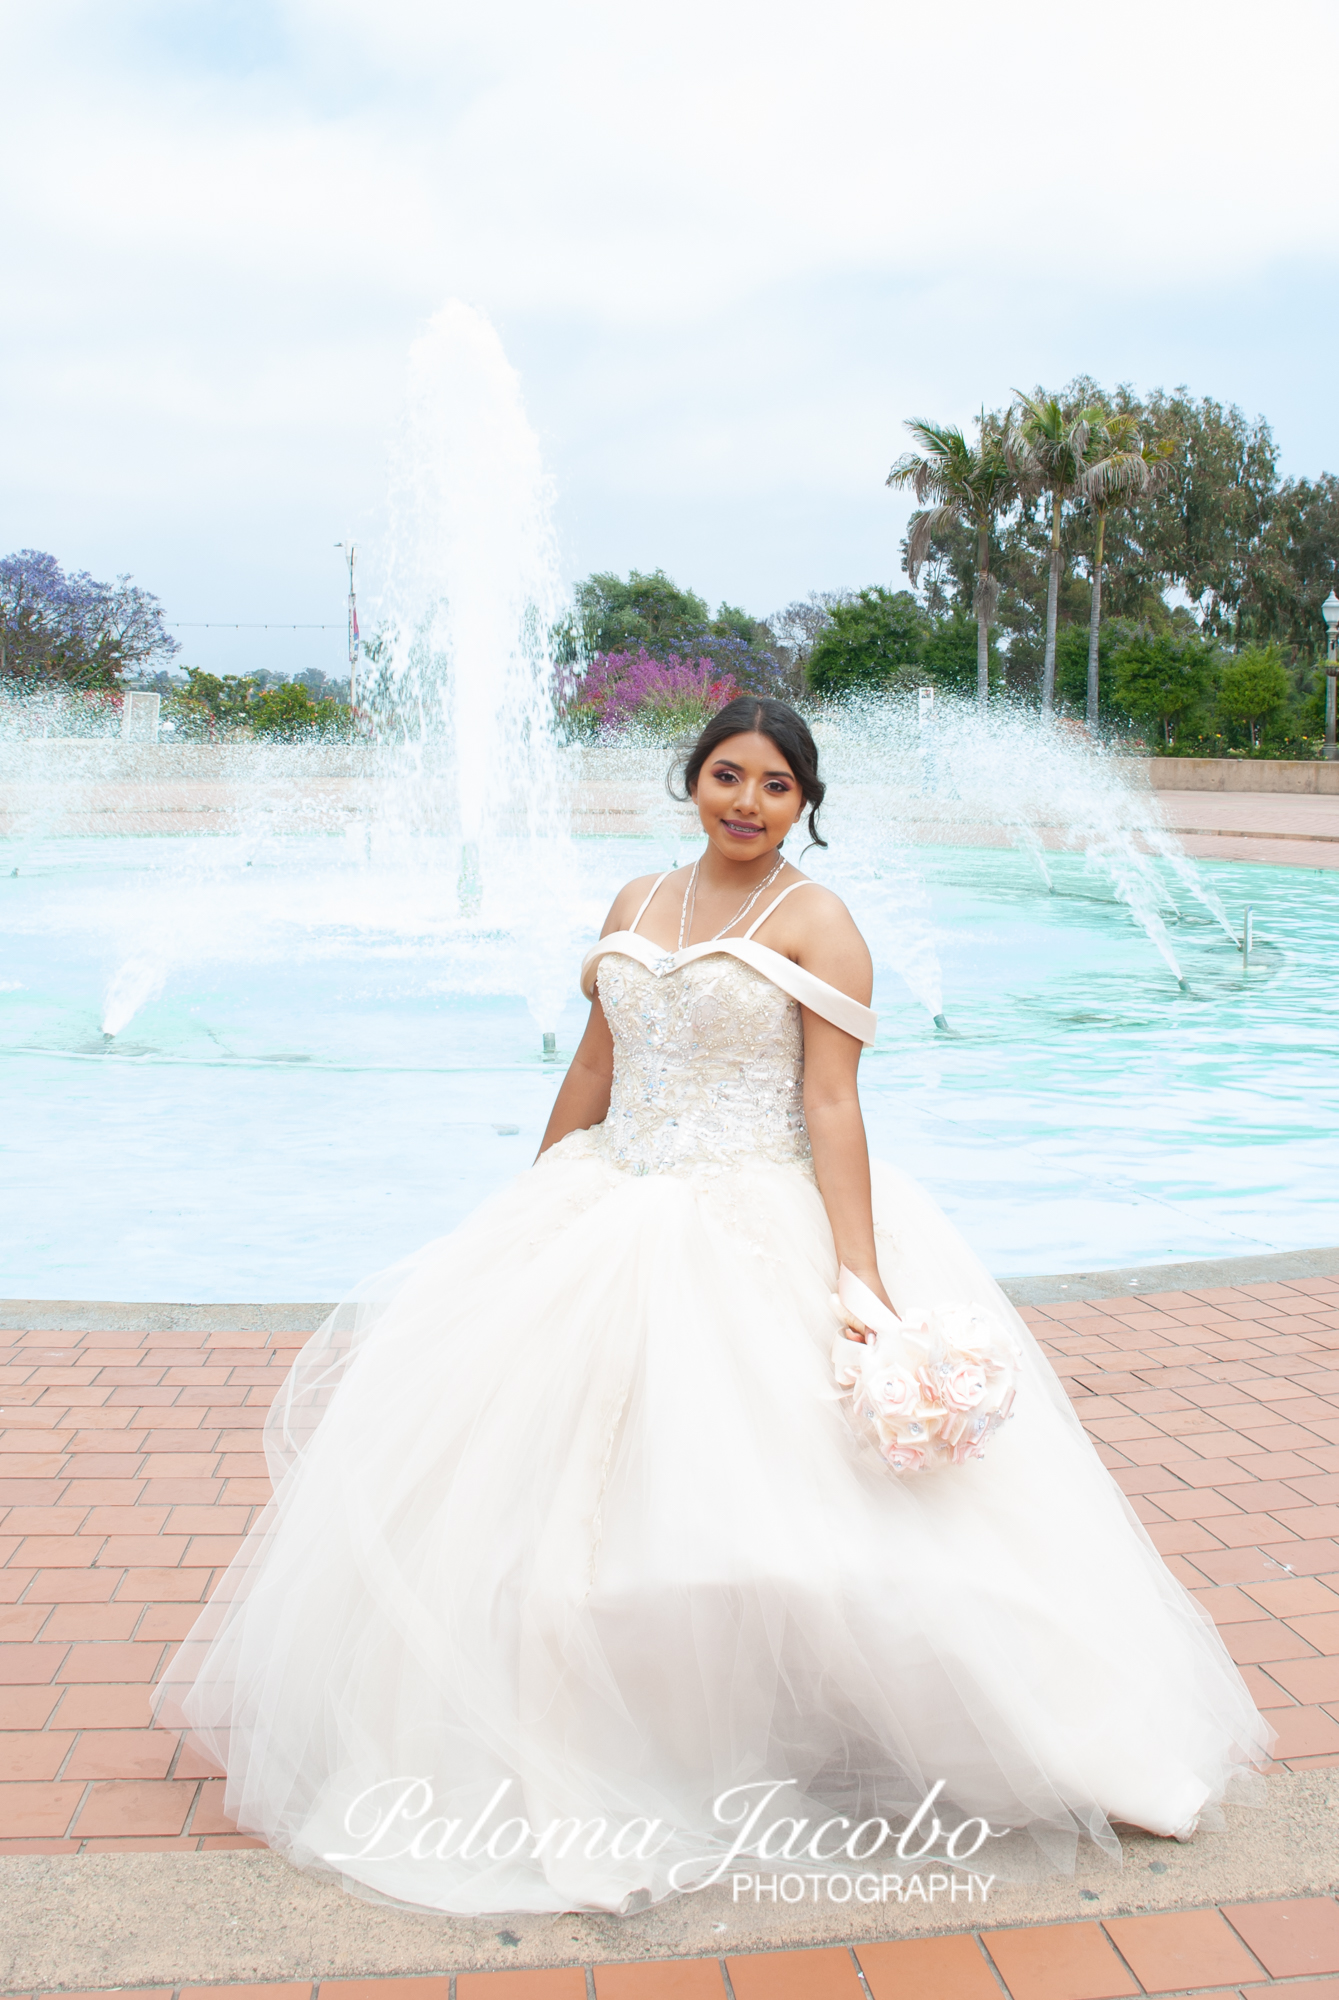 Quinceanera pictures by the fountain in Balboa Park by Paloma Jacobo Photography